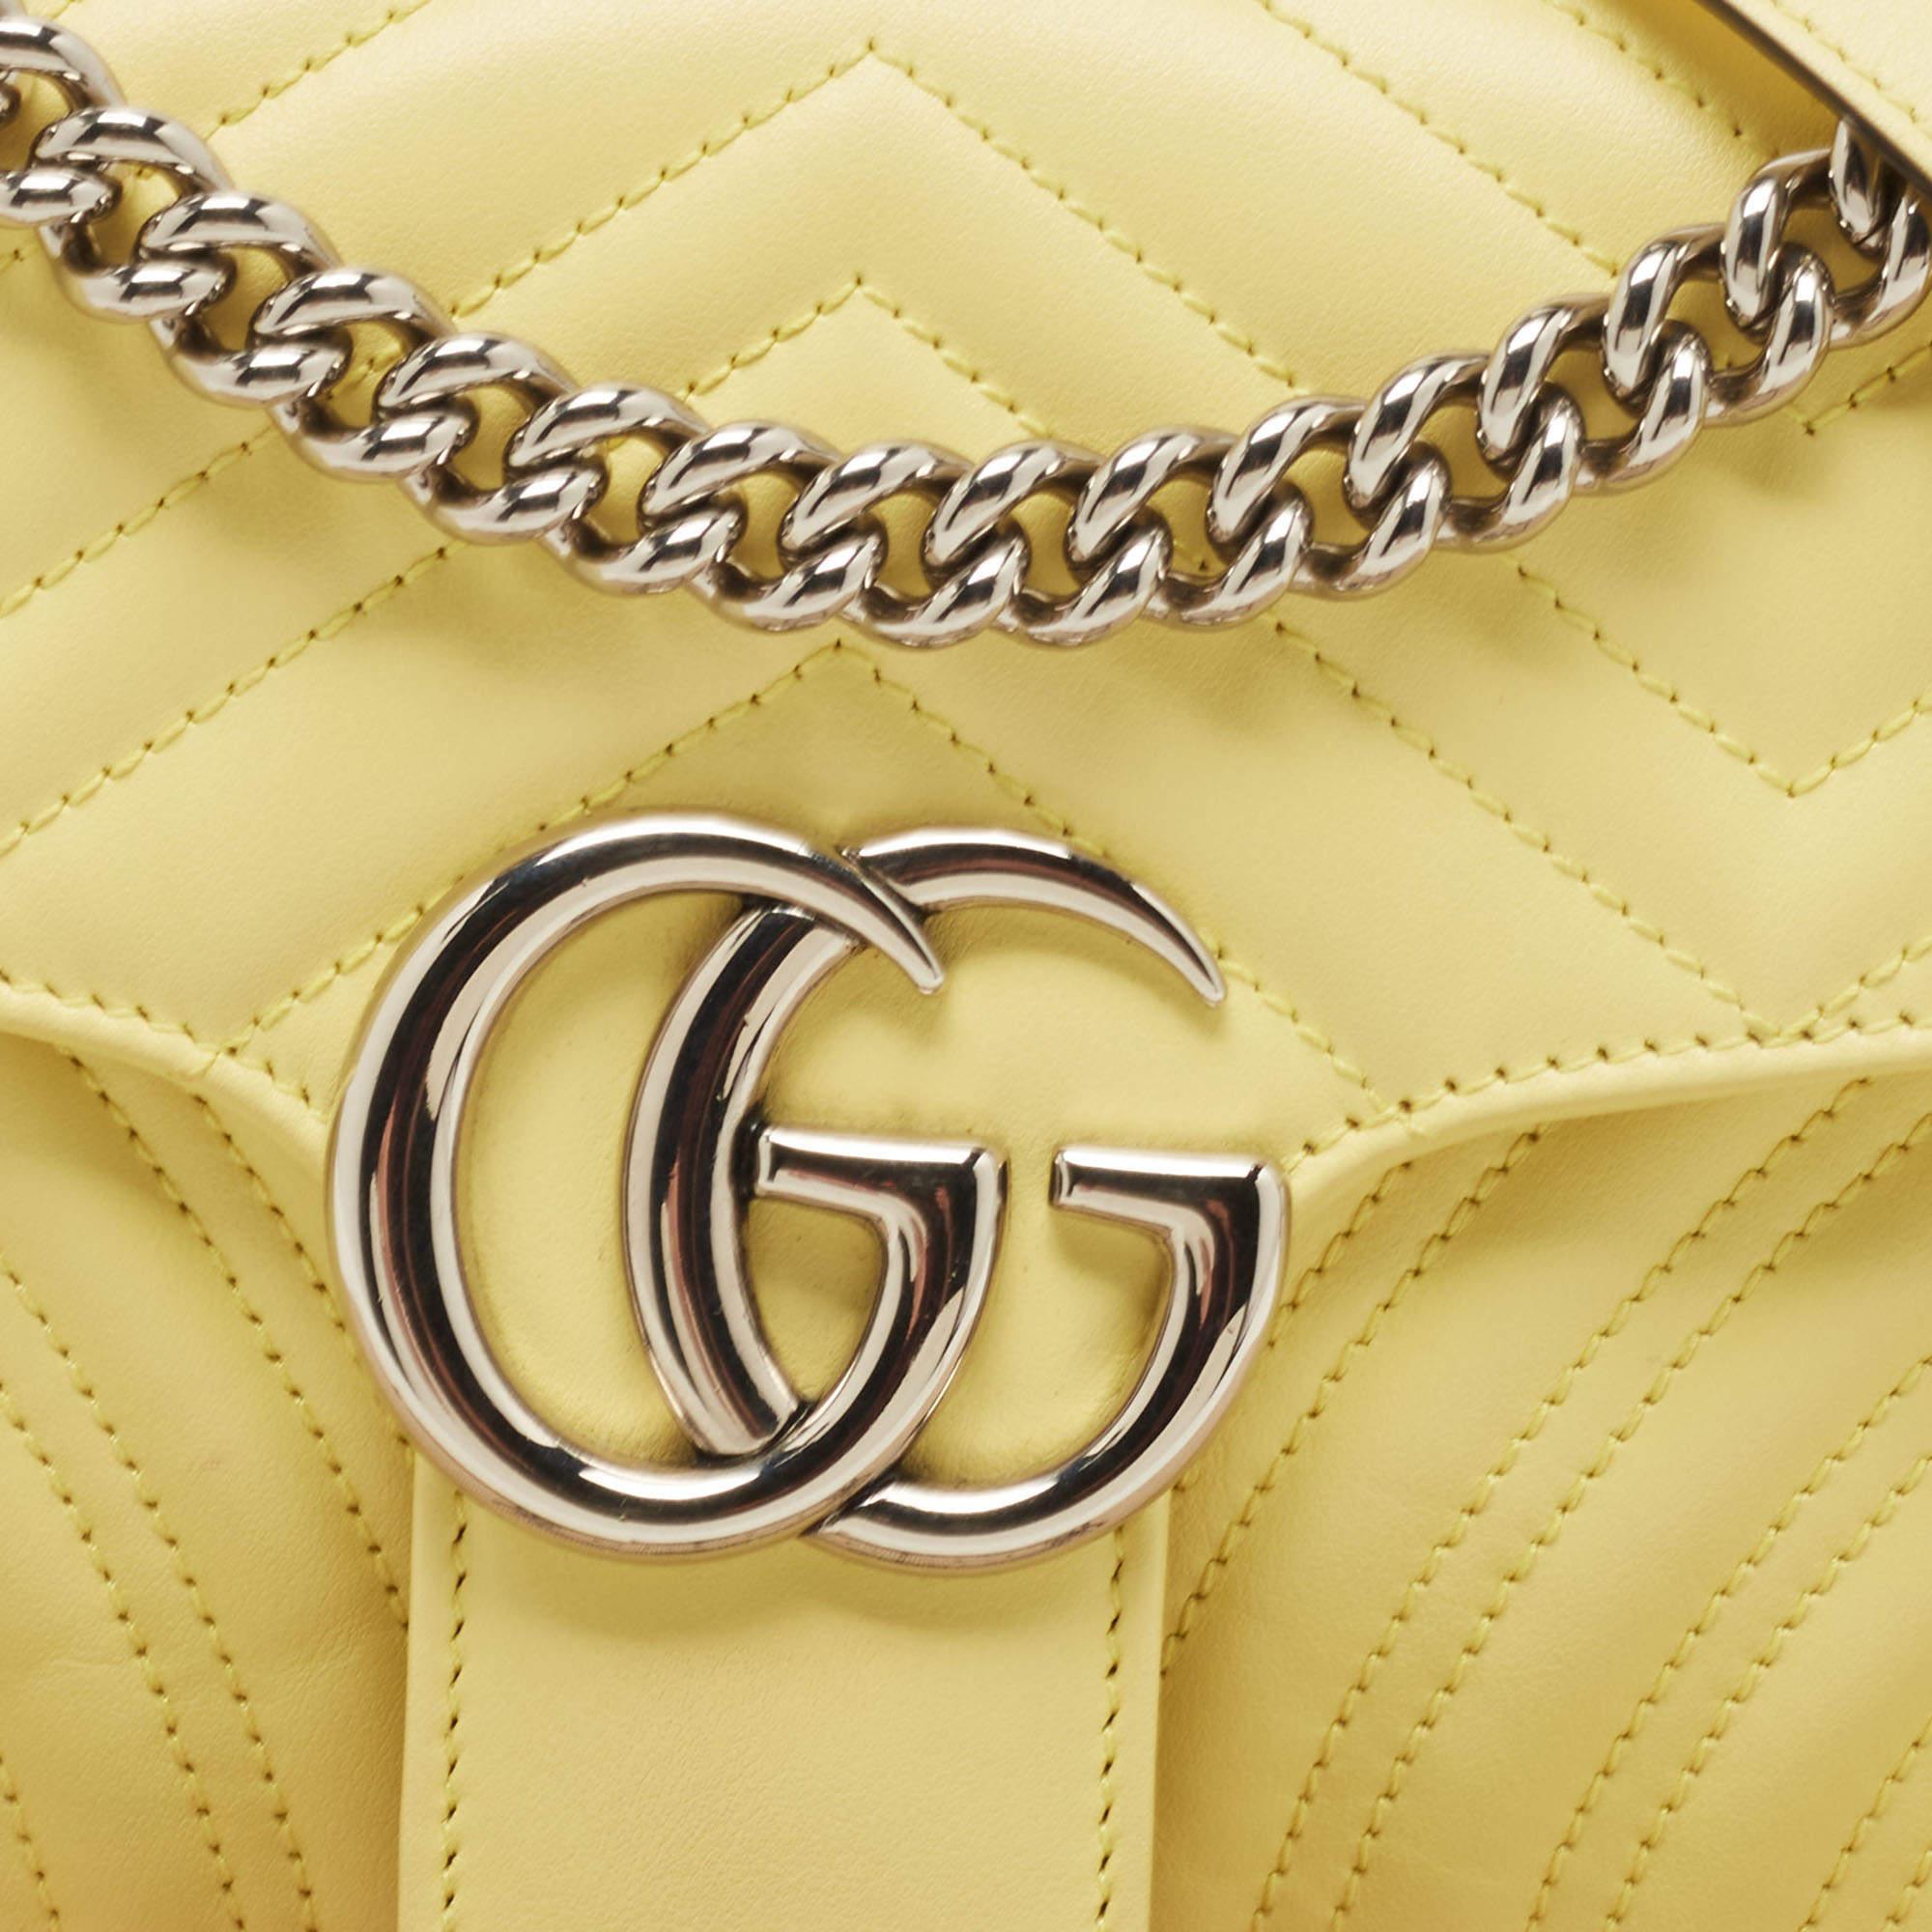 Gucci Yellow Matelassé Leather Small GG Marmont Shoulder Bag 5